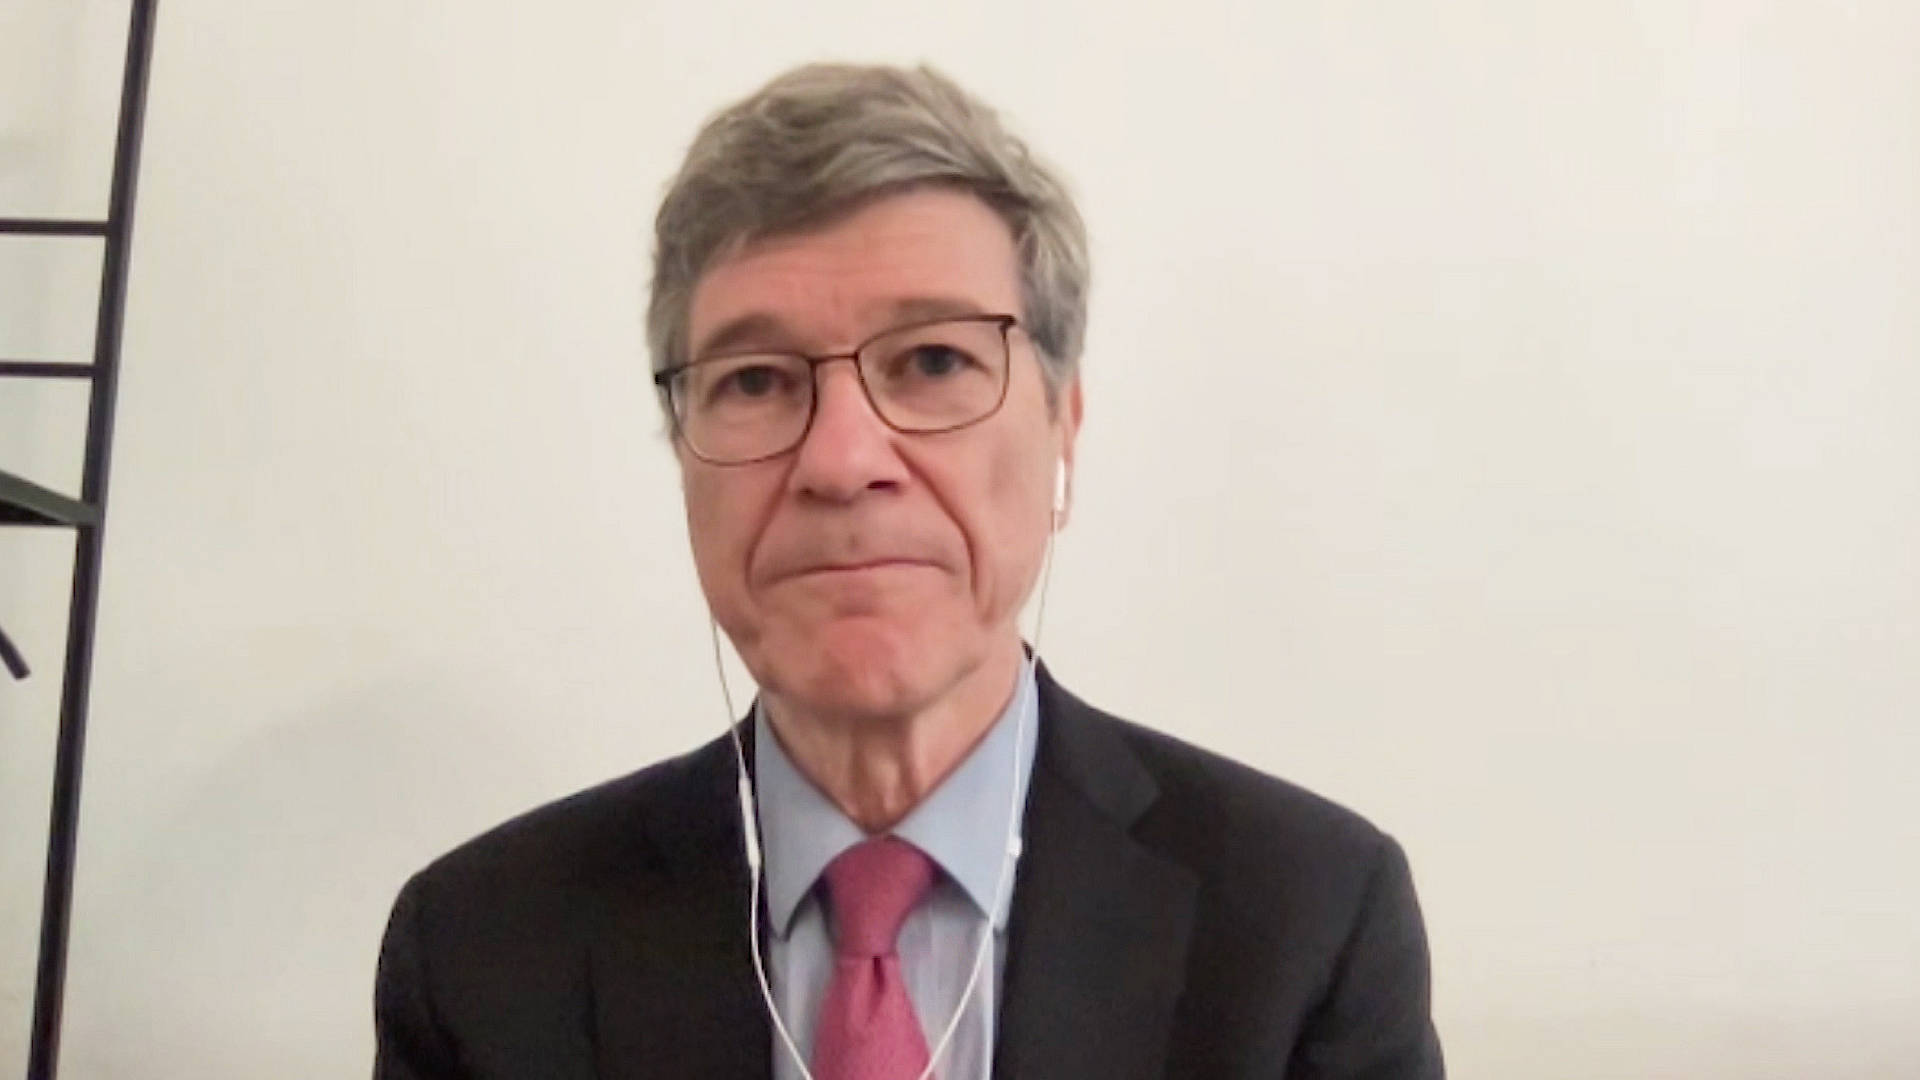 Jeffrey Sachs on Rising: I Was a Democrat… COVID CHANGED THAT